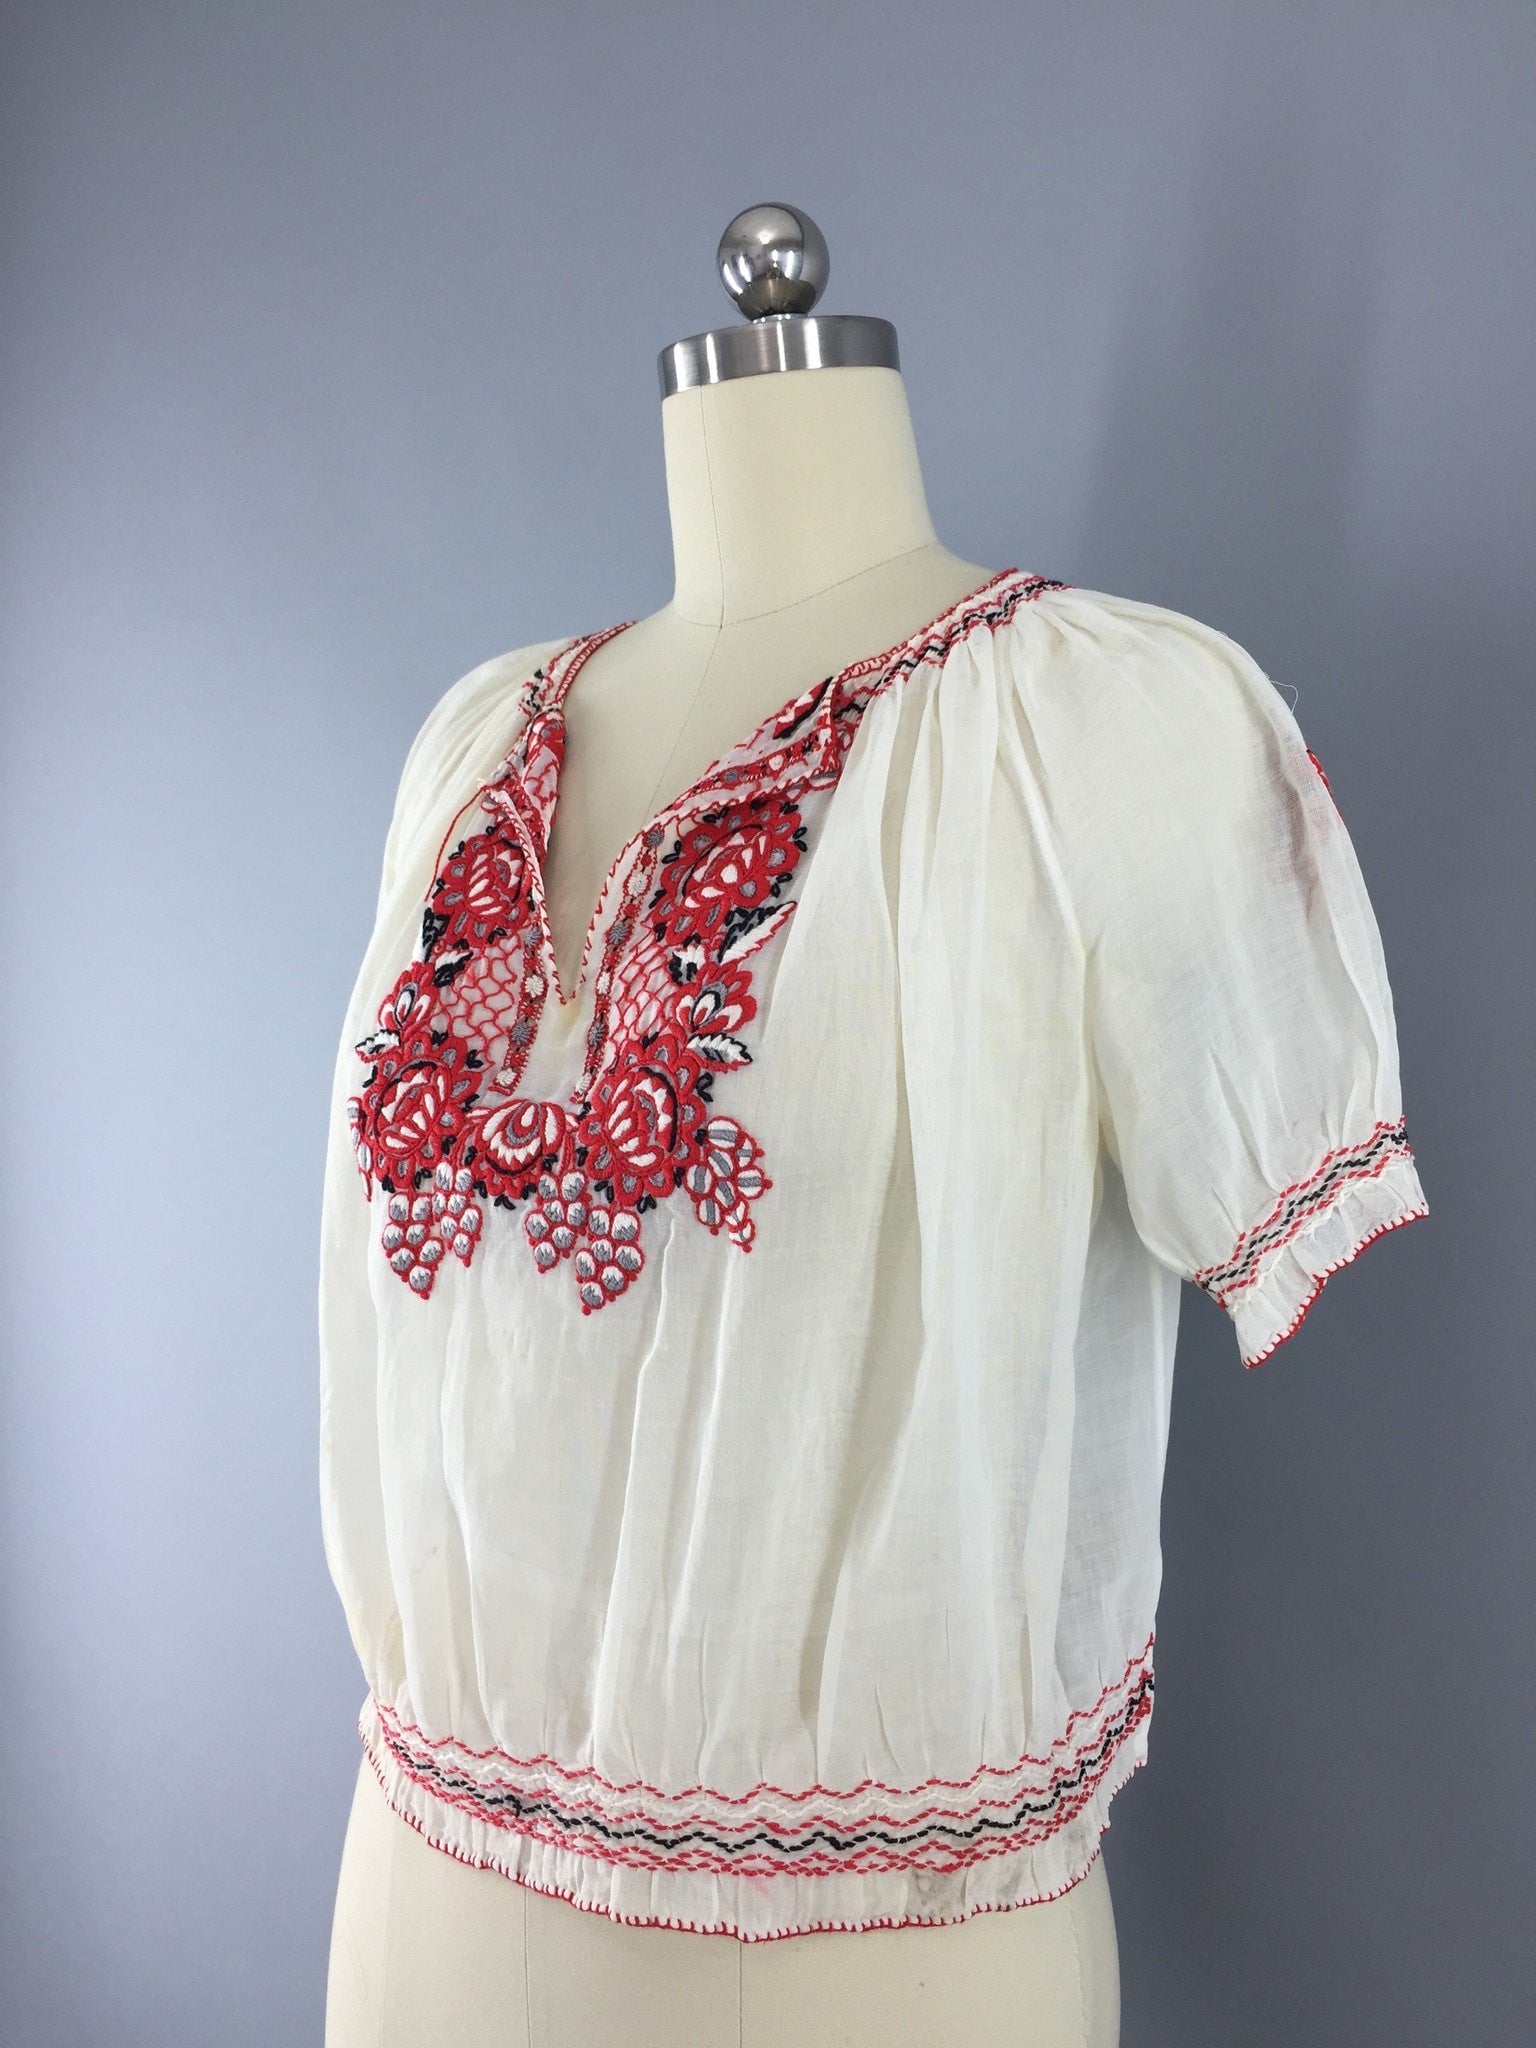 Vintage 1930s Peasant Blouse / Hungarian Embroidered